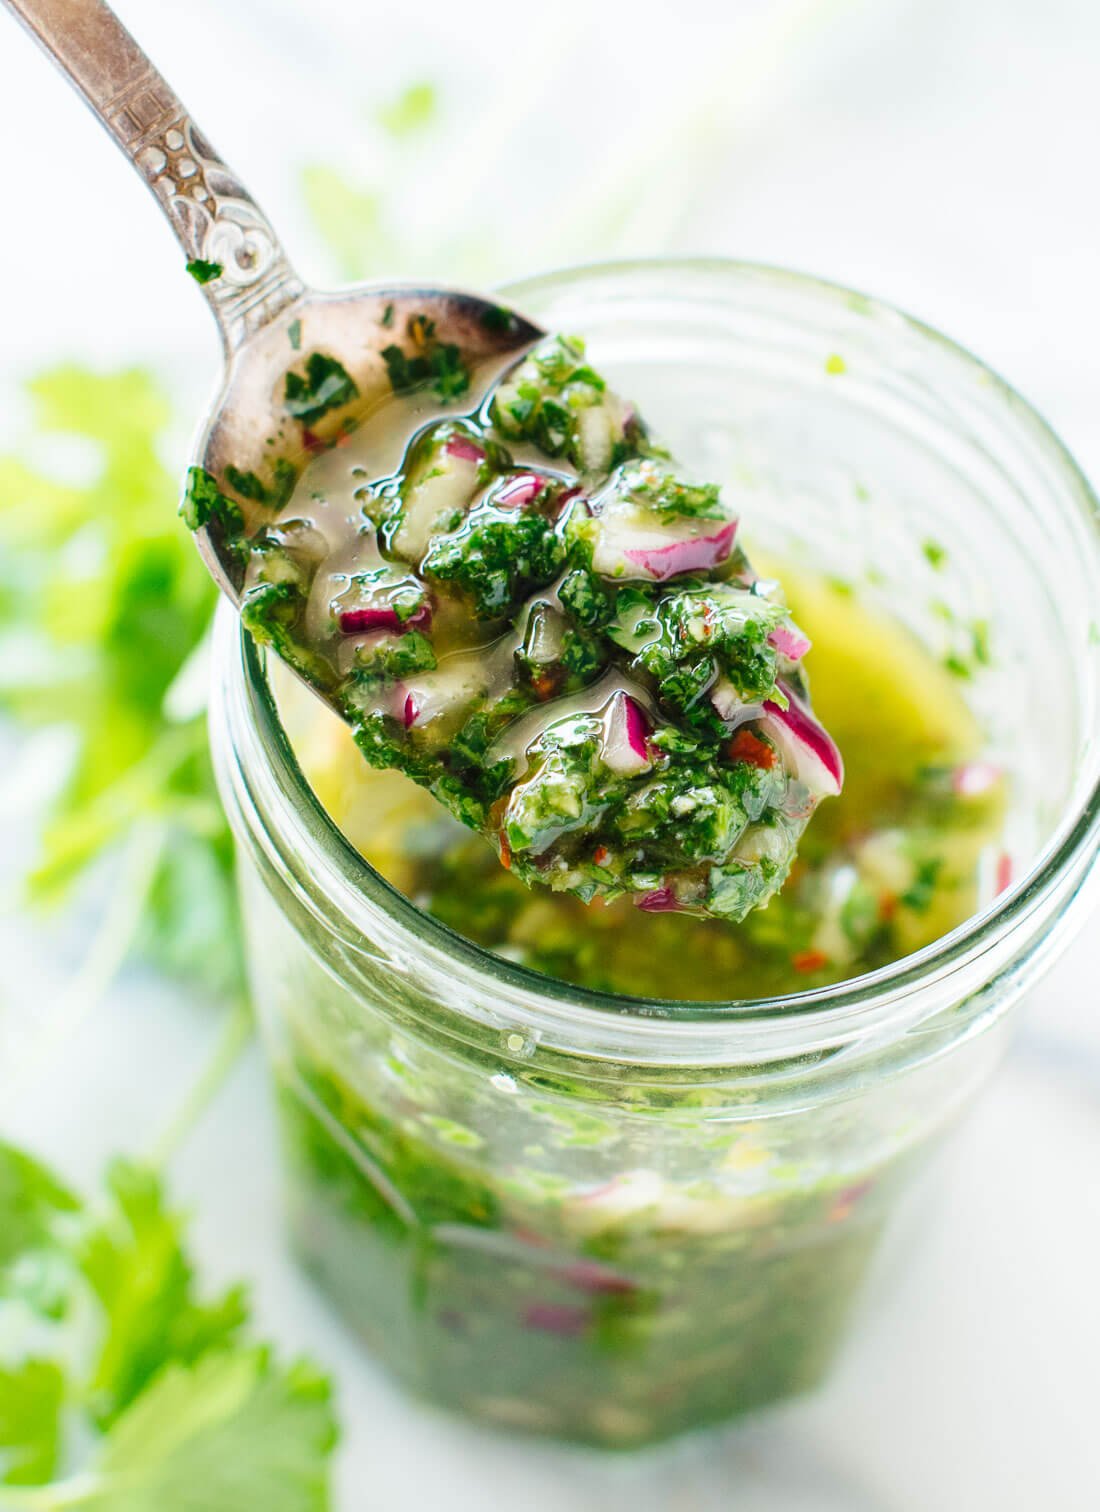 Fresh chimichurri verde recipe, made with parsley, red onion, garlic, red wine vinegar, olive oil and red pepper flakes. cookieandkate.com